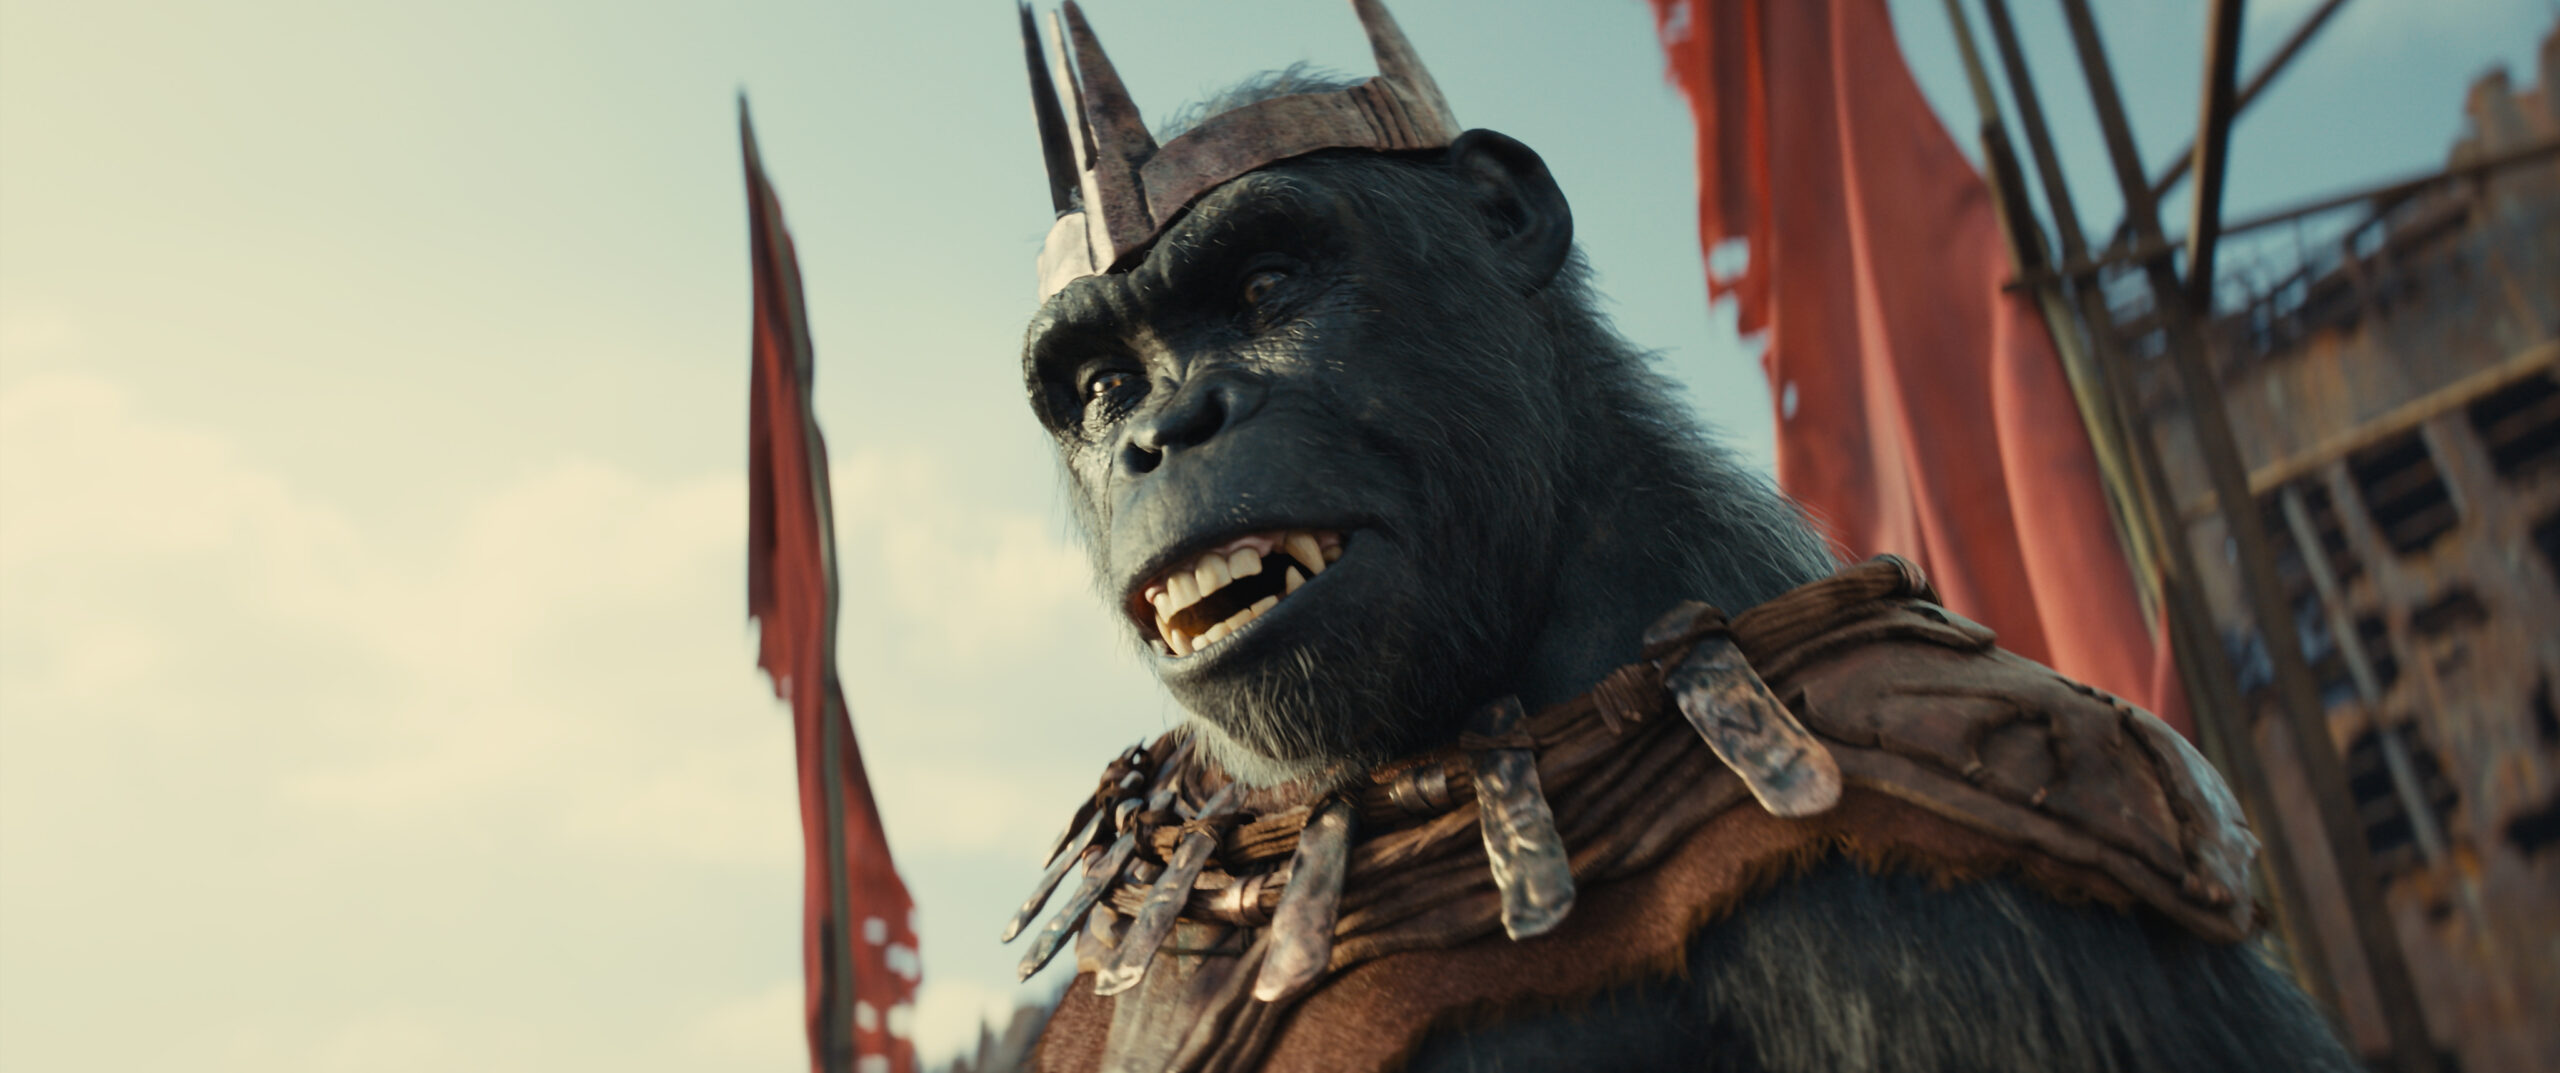 'Kingdom of the Planet of the Apes' Hits PH Theaters May 8—Watch the Trailer Here!